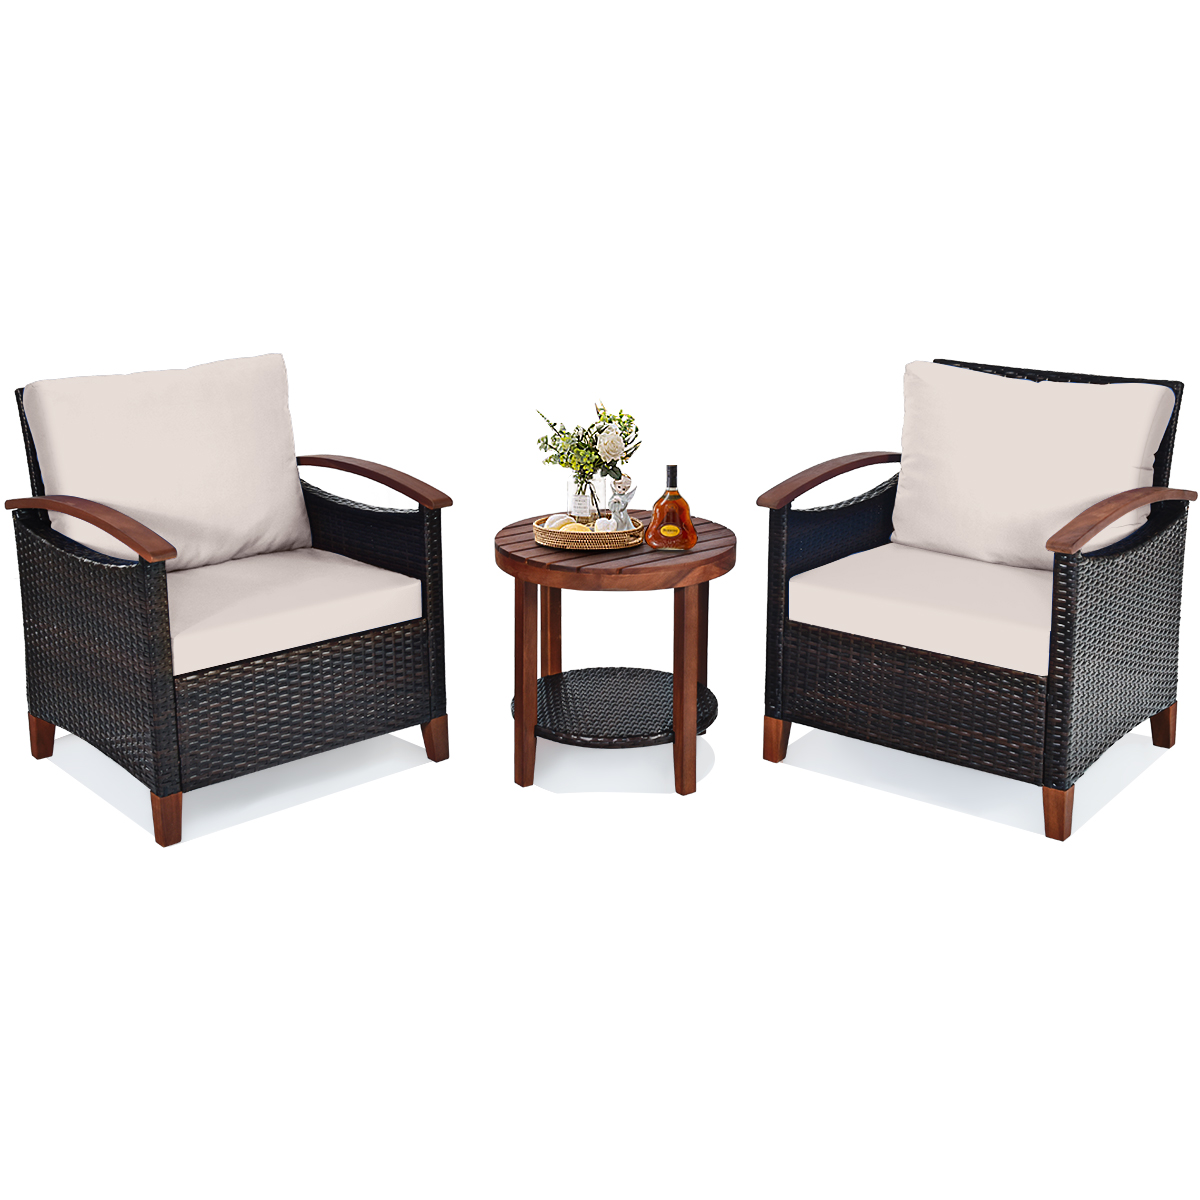 Patiojoy 3-Piece Patio Rattan Bistro Set Acacia Wood Frame Sofa and Side Table Beige - image 1 of 6